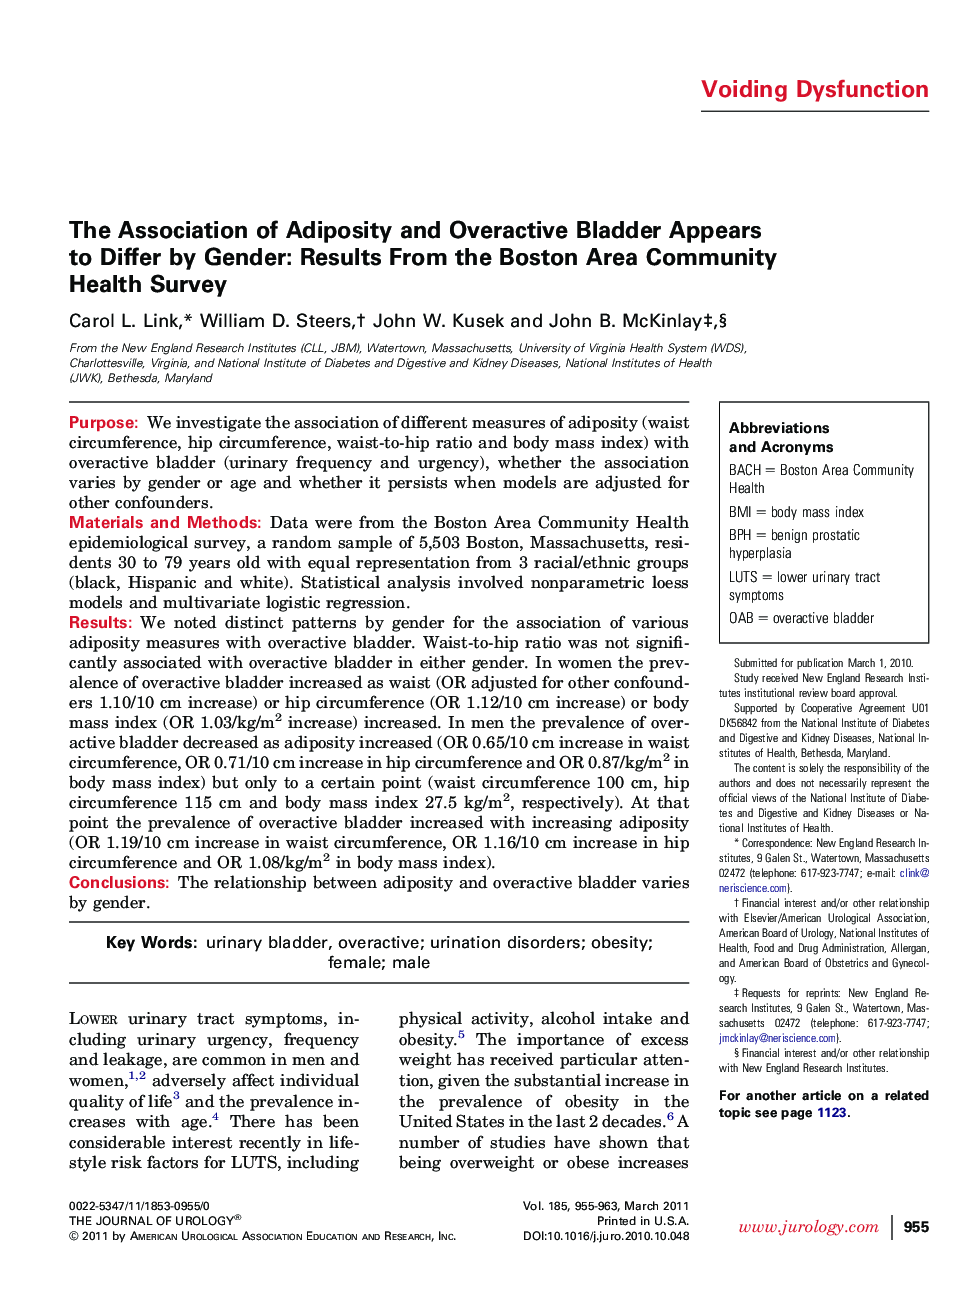 The Association of Adiposity and Overactive Bladder Appears to Differ by Gender: Results From the Boston Area Community Health Survey